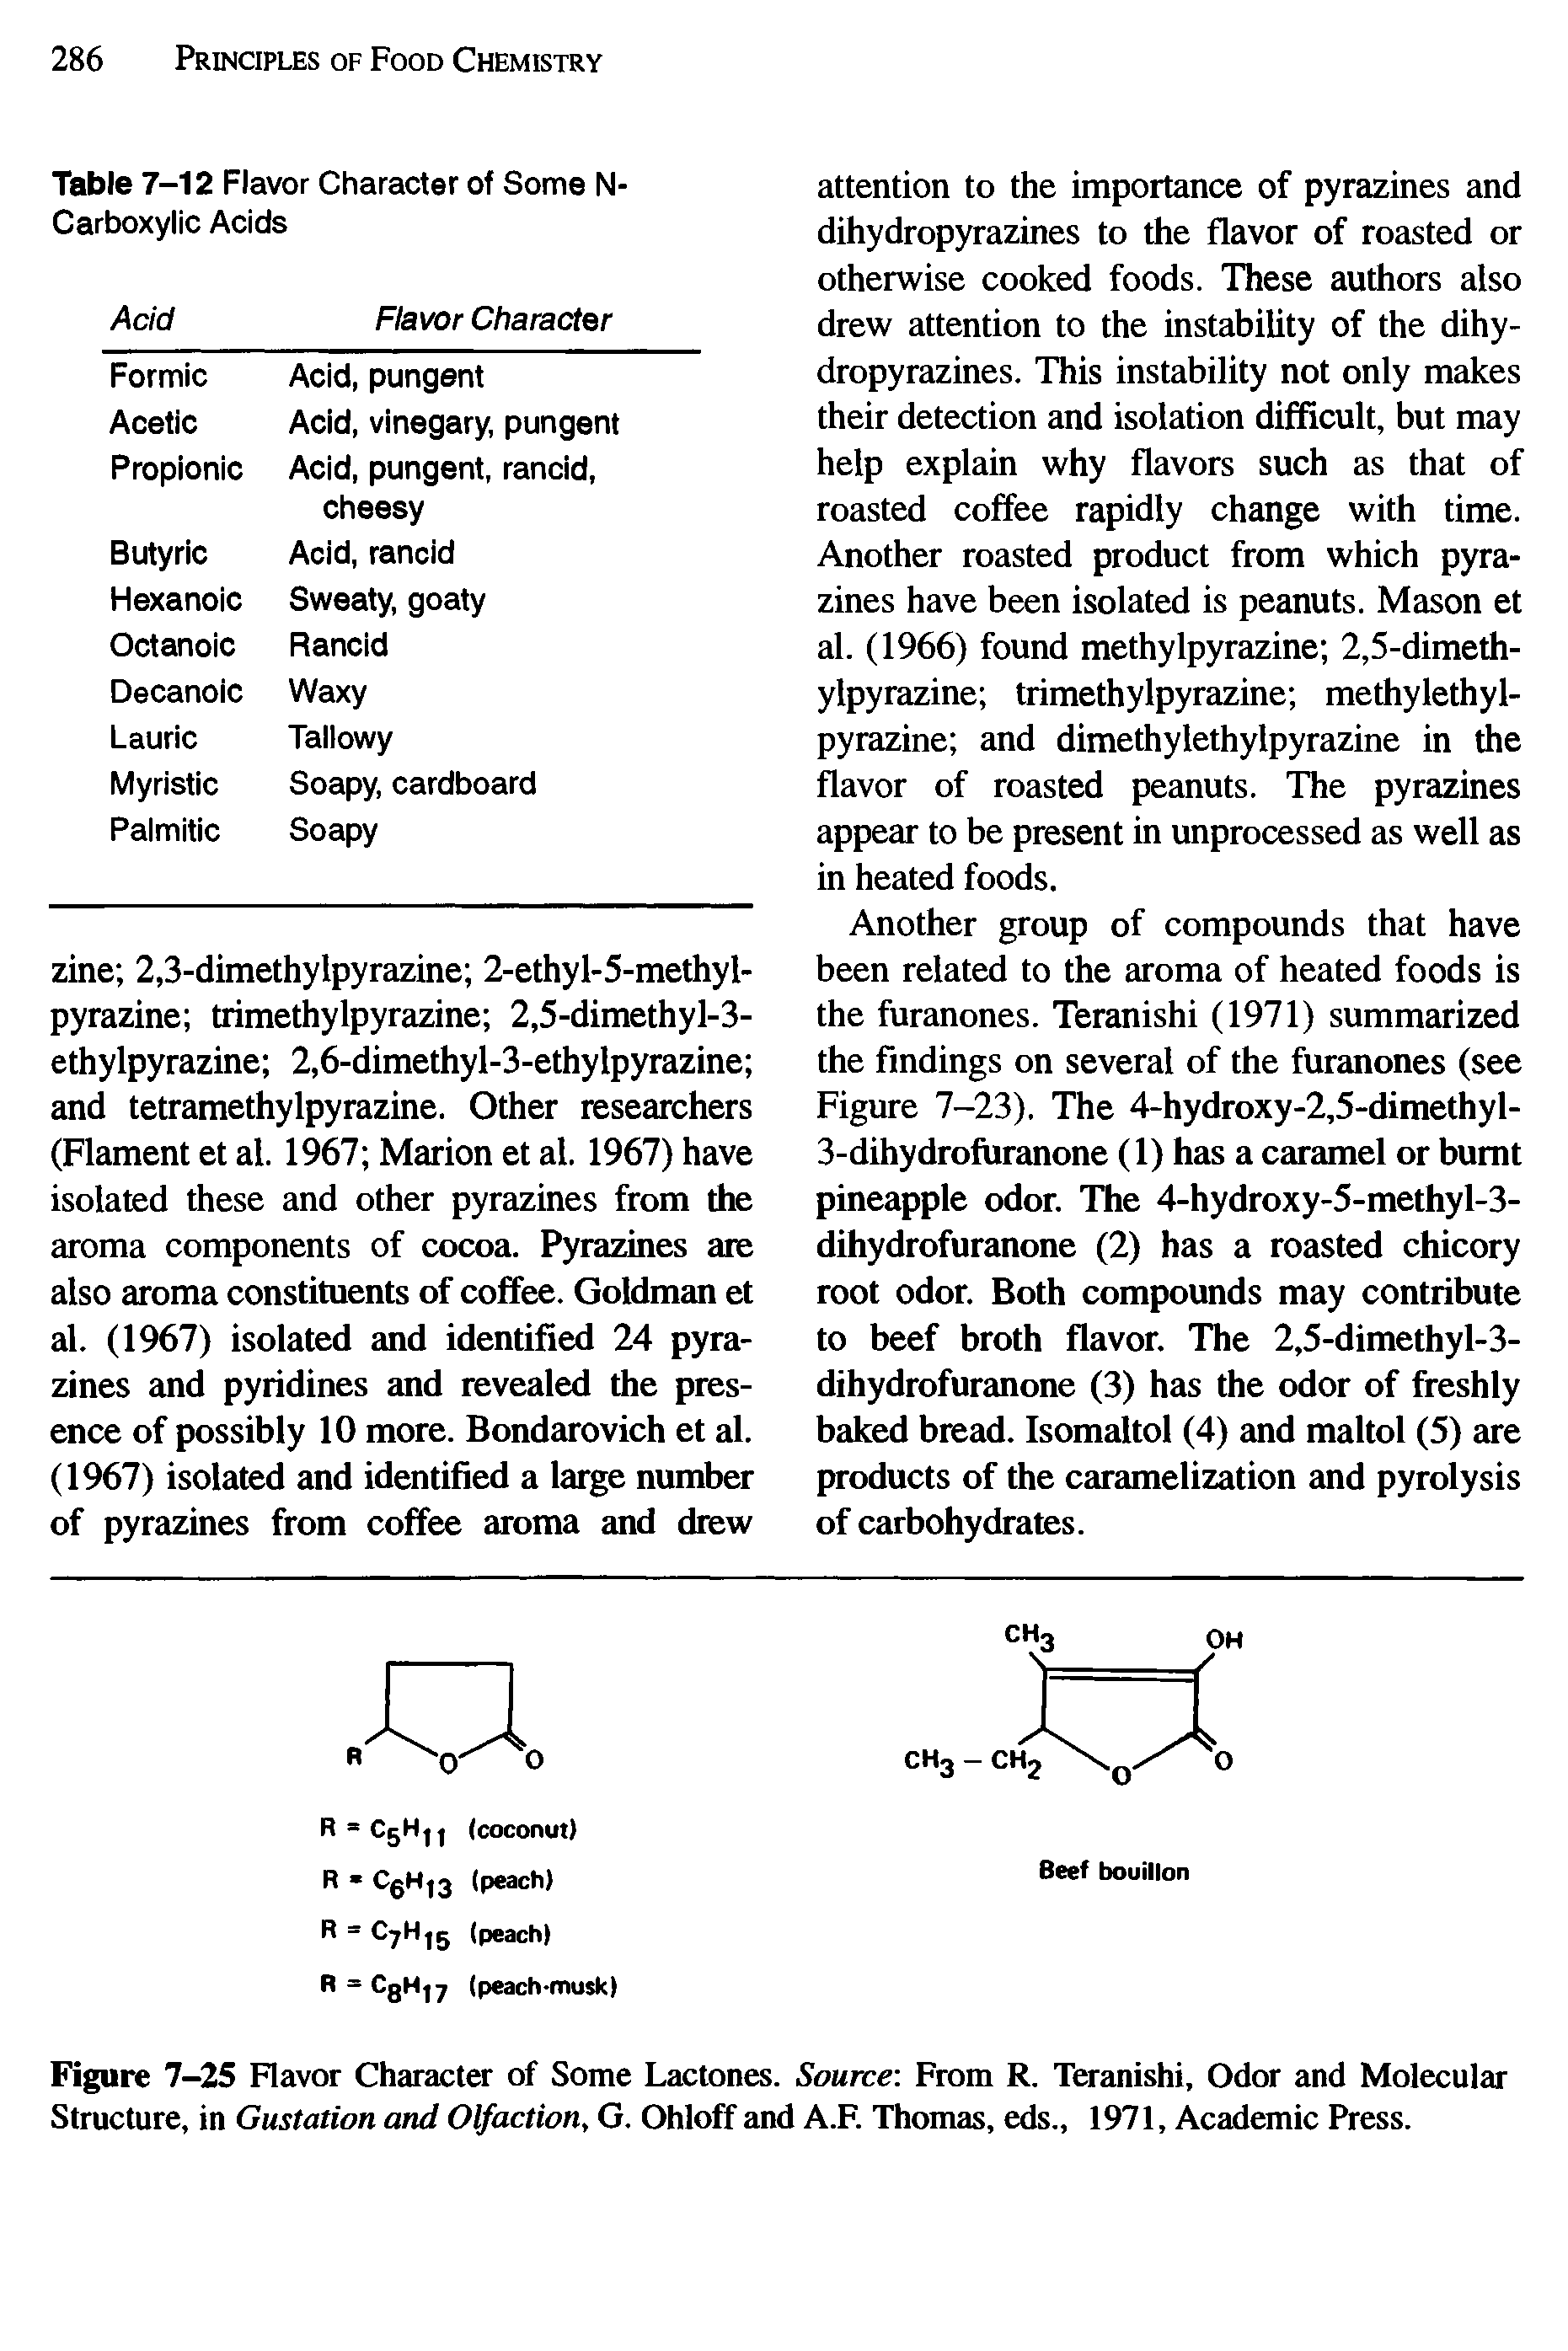 Figure 7-25 Flavor Character of Some Lactones. Source From R. Teranishi, Odor and Molecular Structure, in Gustation and Olfaction, G. Ohloff and A.F. Thomas, eds., 1971, Academic Press.